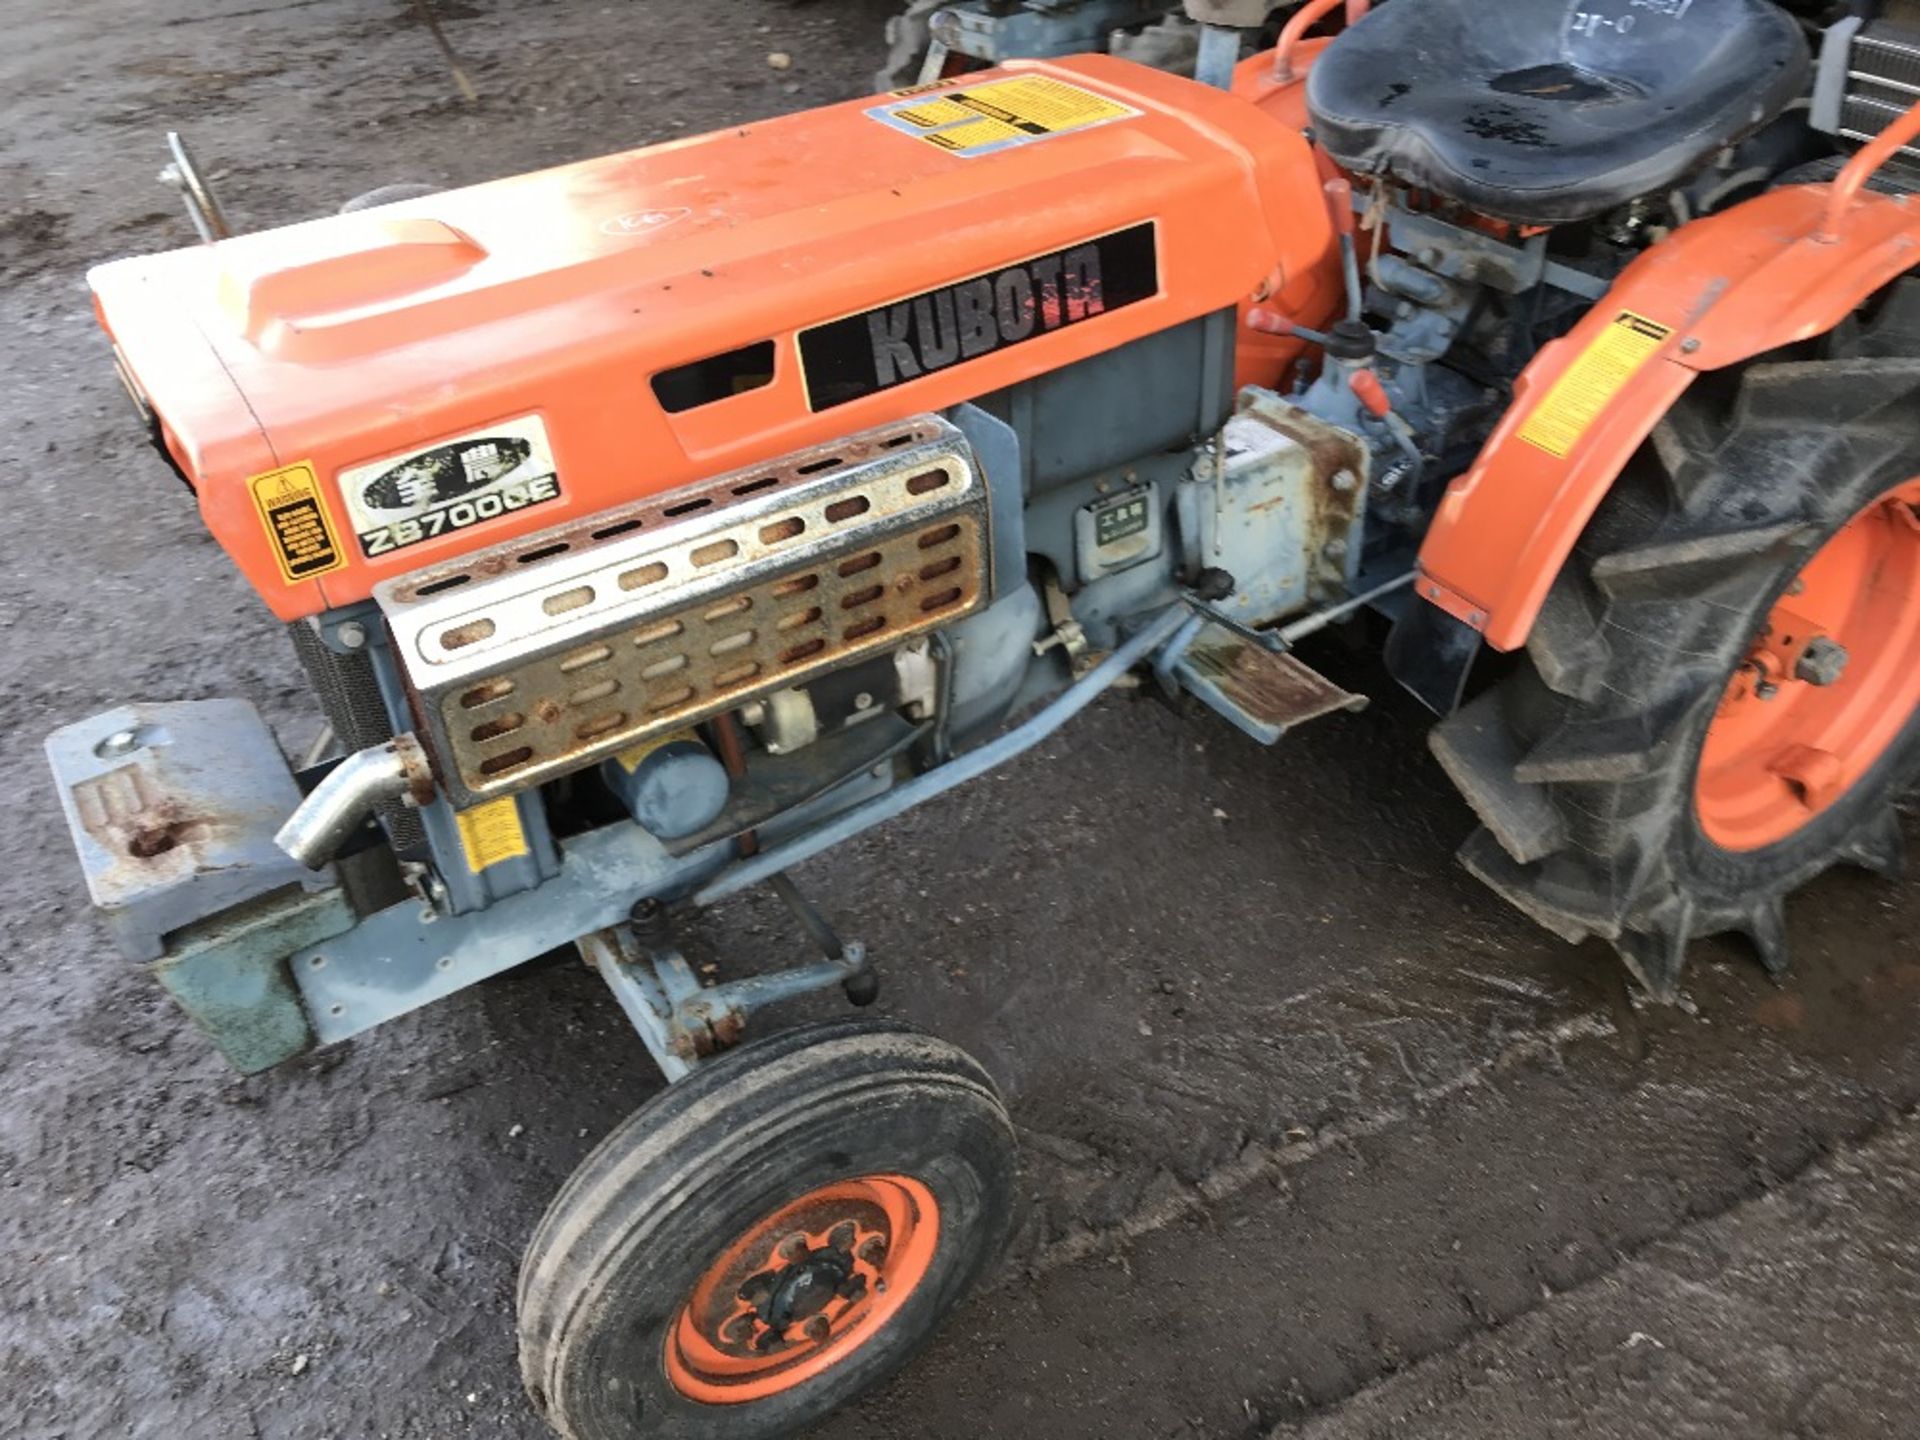 Kubota ZB7000E 2wd compact tractor c/w rear linkage WHEN TESTED WAS SEEN TO RUN, DRIVE, STEER AND - Image 2 of 3